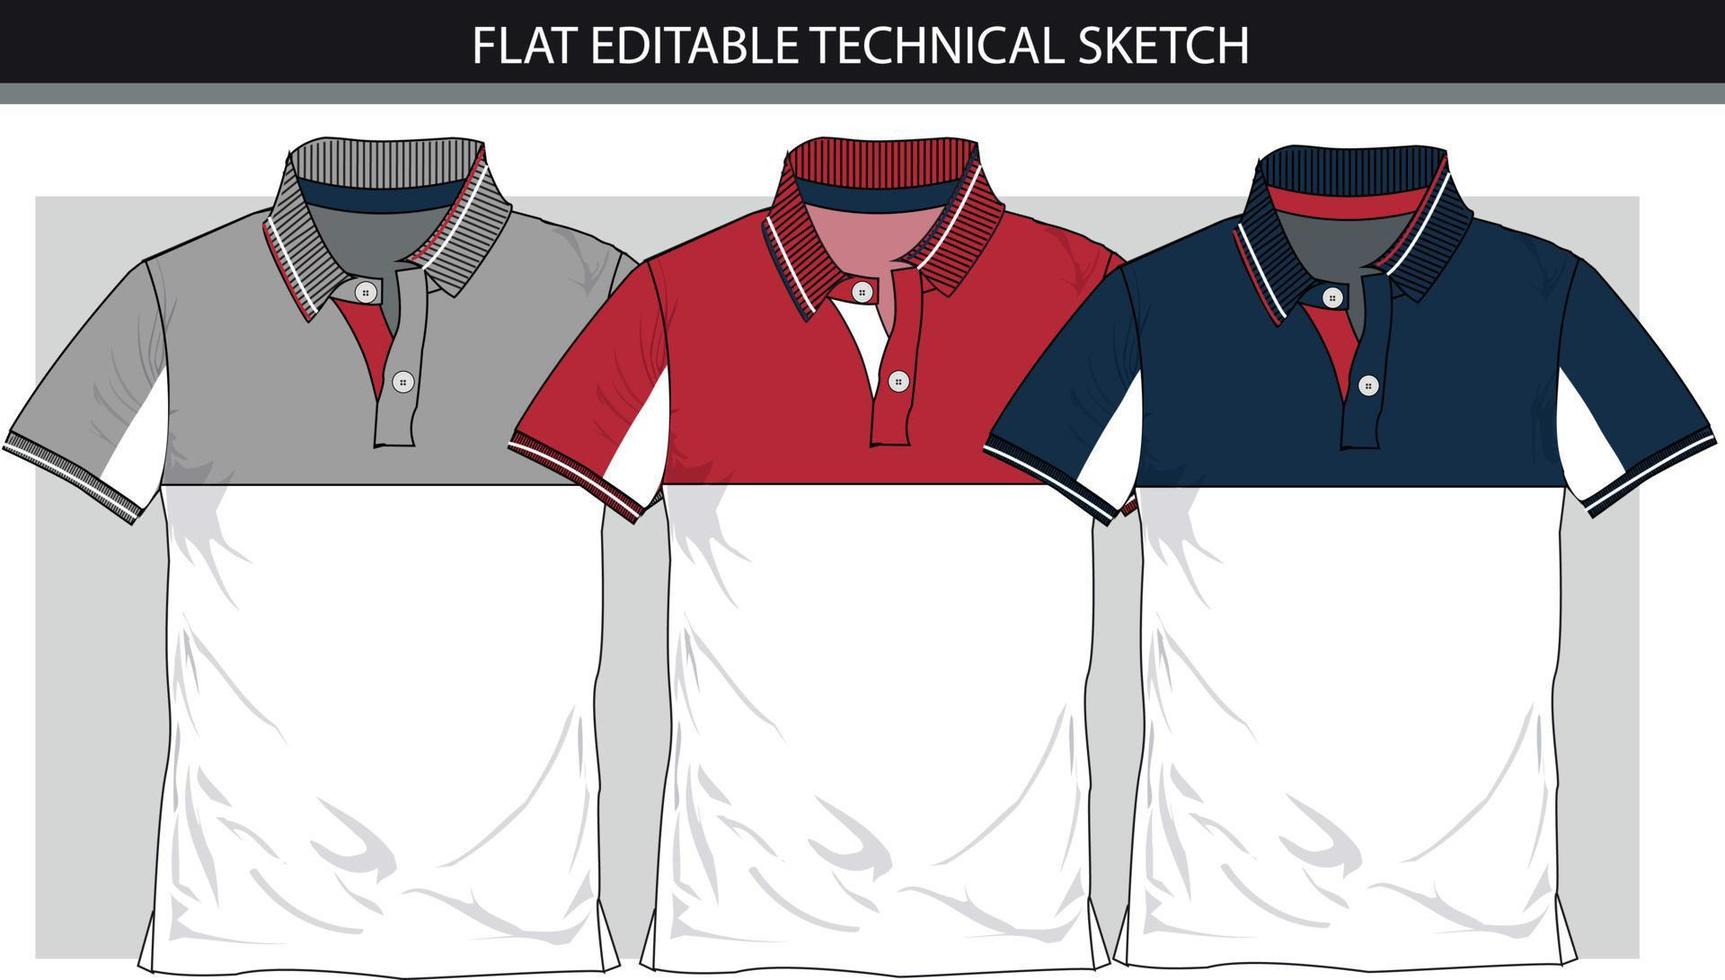 A set of polo shirts with coloured block flat editable technical sketches vector file